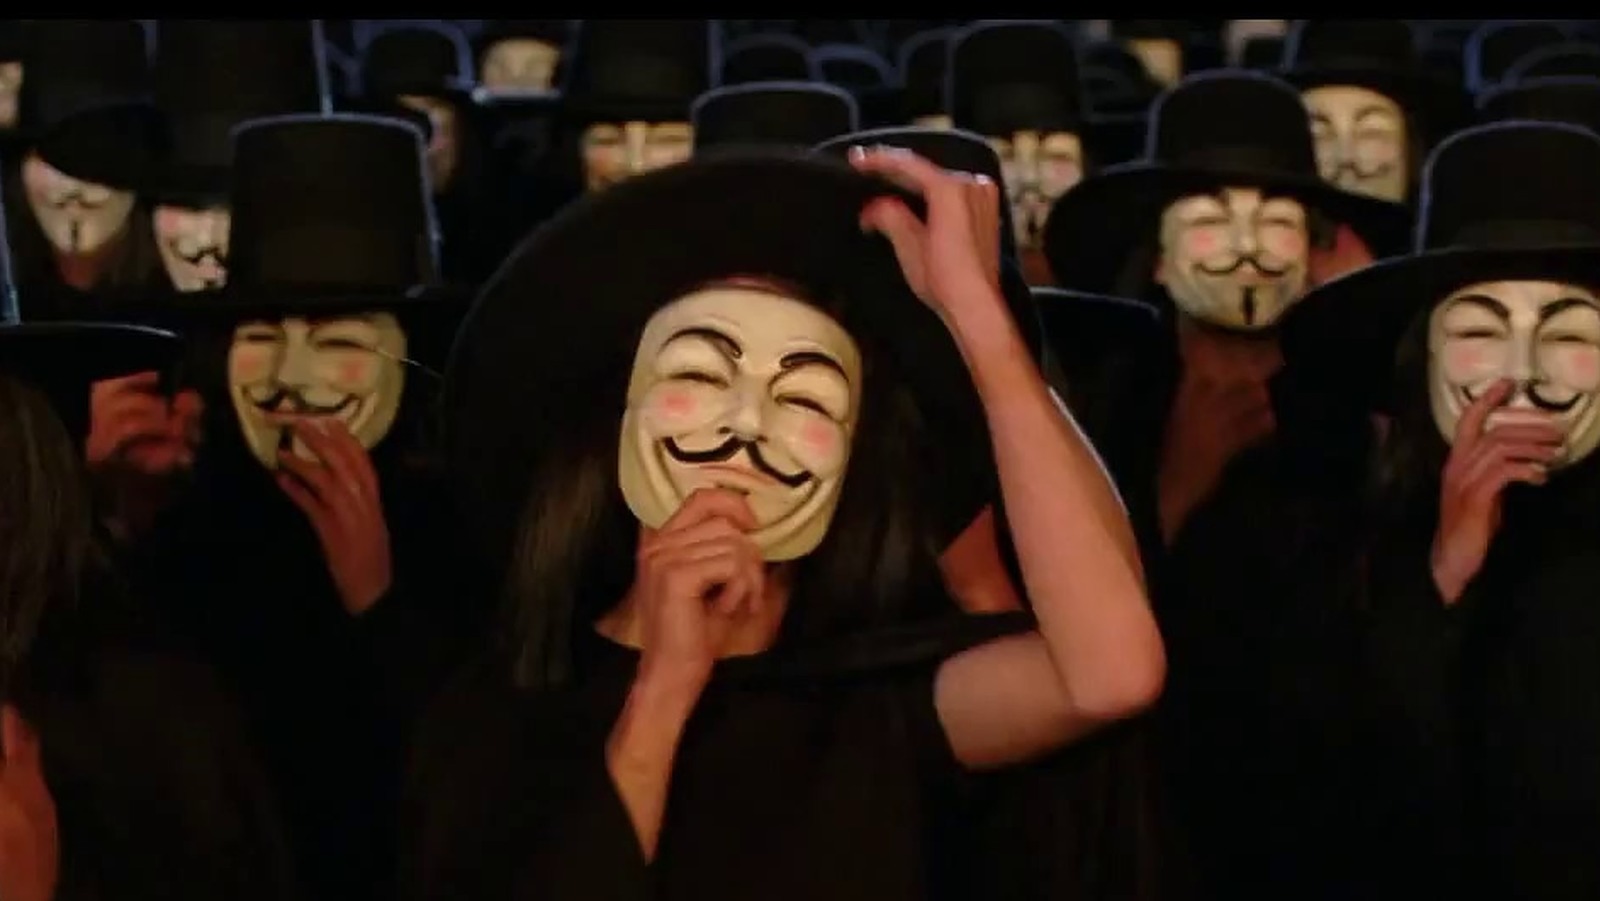 Meting abstract drijvend What The Unmasking Scene In V For Vendetta Really Means